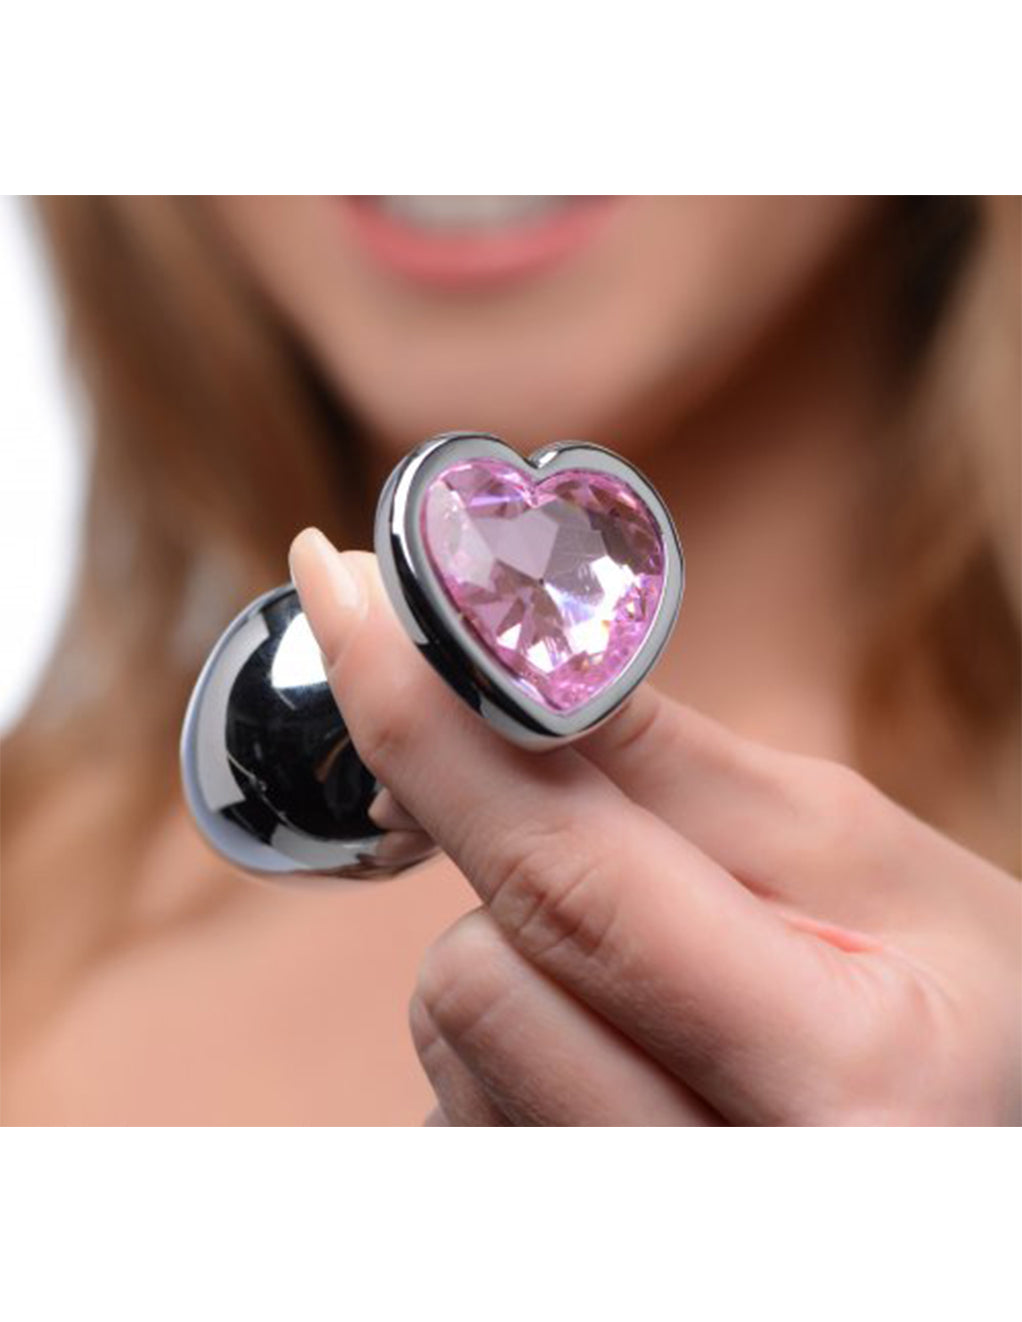 Booty Sparks Pink Heart Plug Set- In Hand